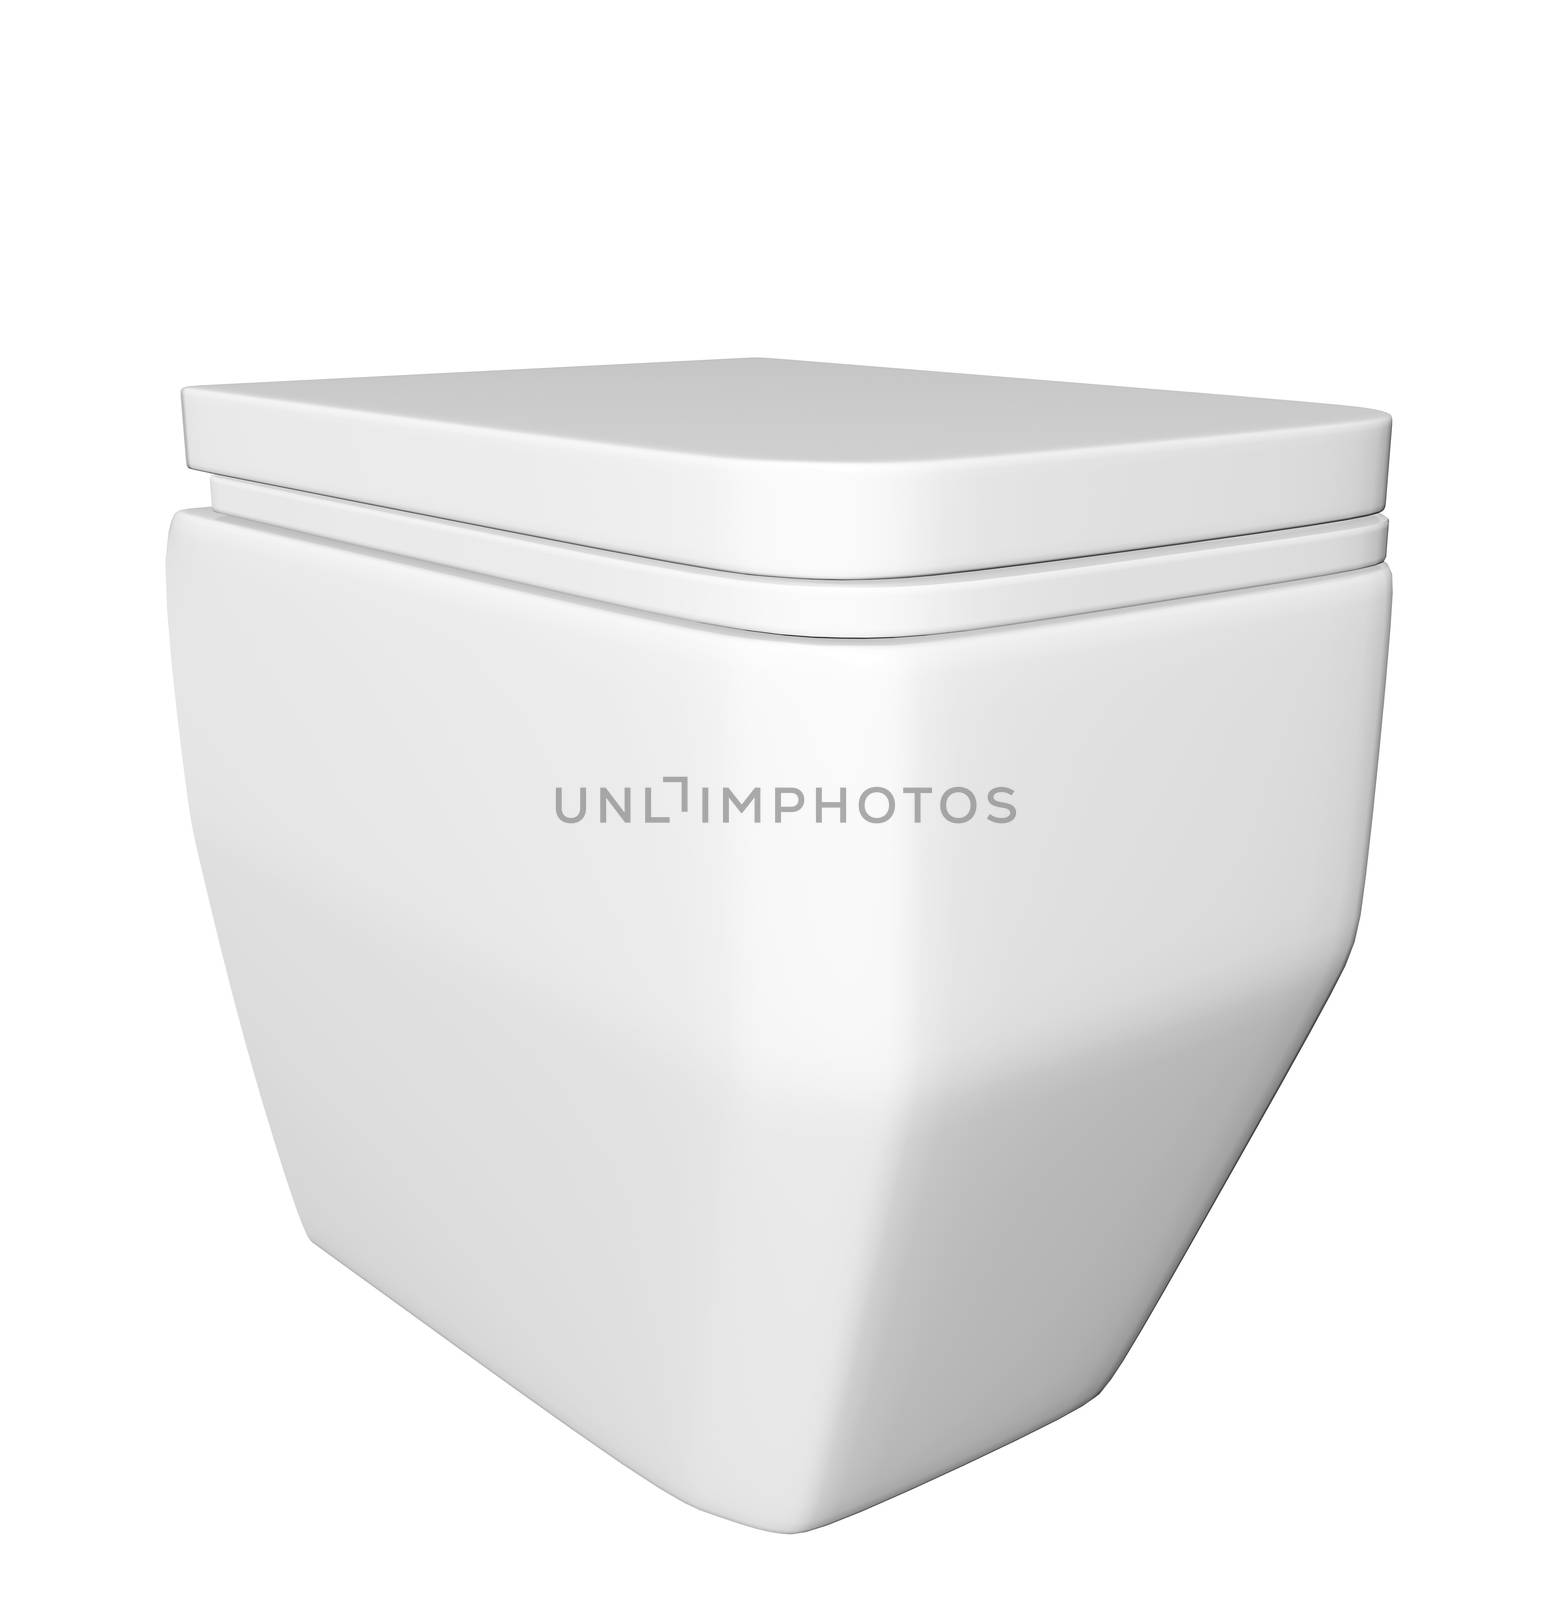 Modern square white ceramic and acrylic toilet bowl and lid, isolated against a white background. 3D illustration by Morphart